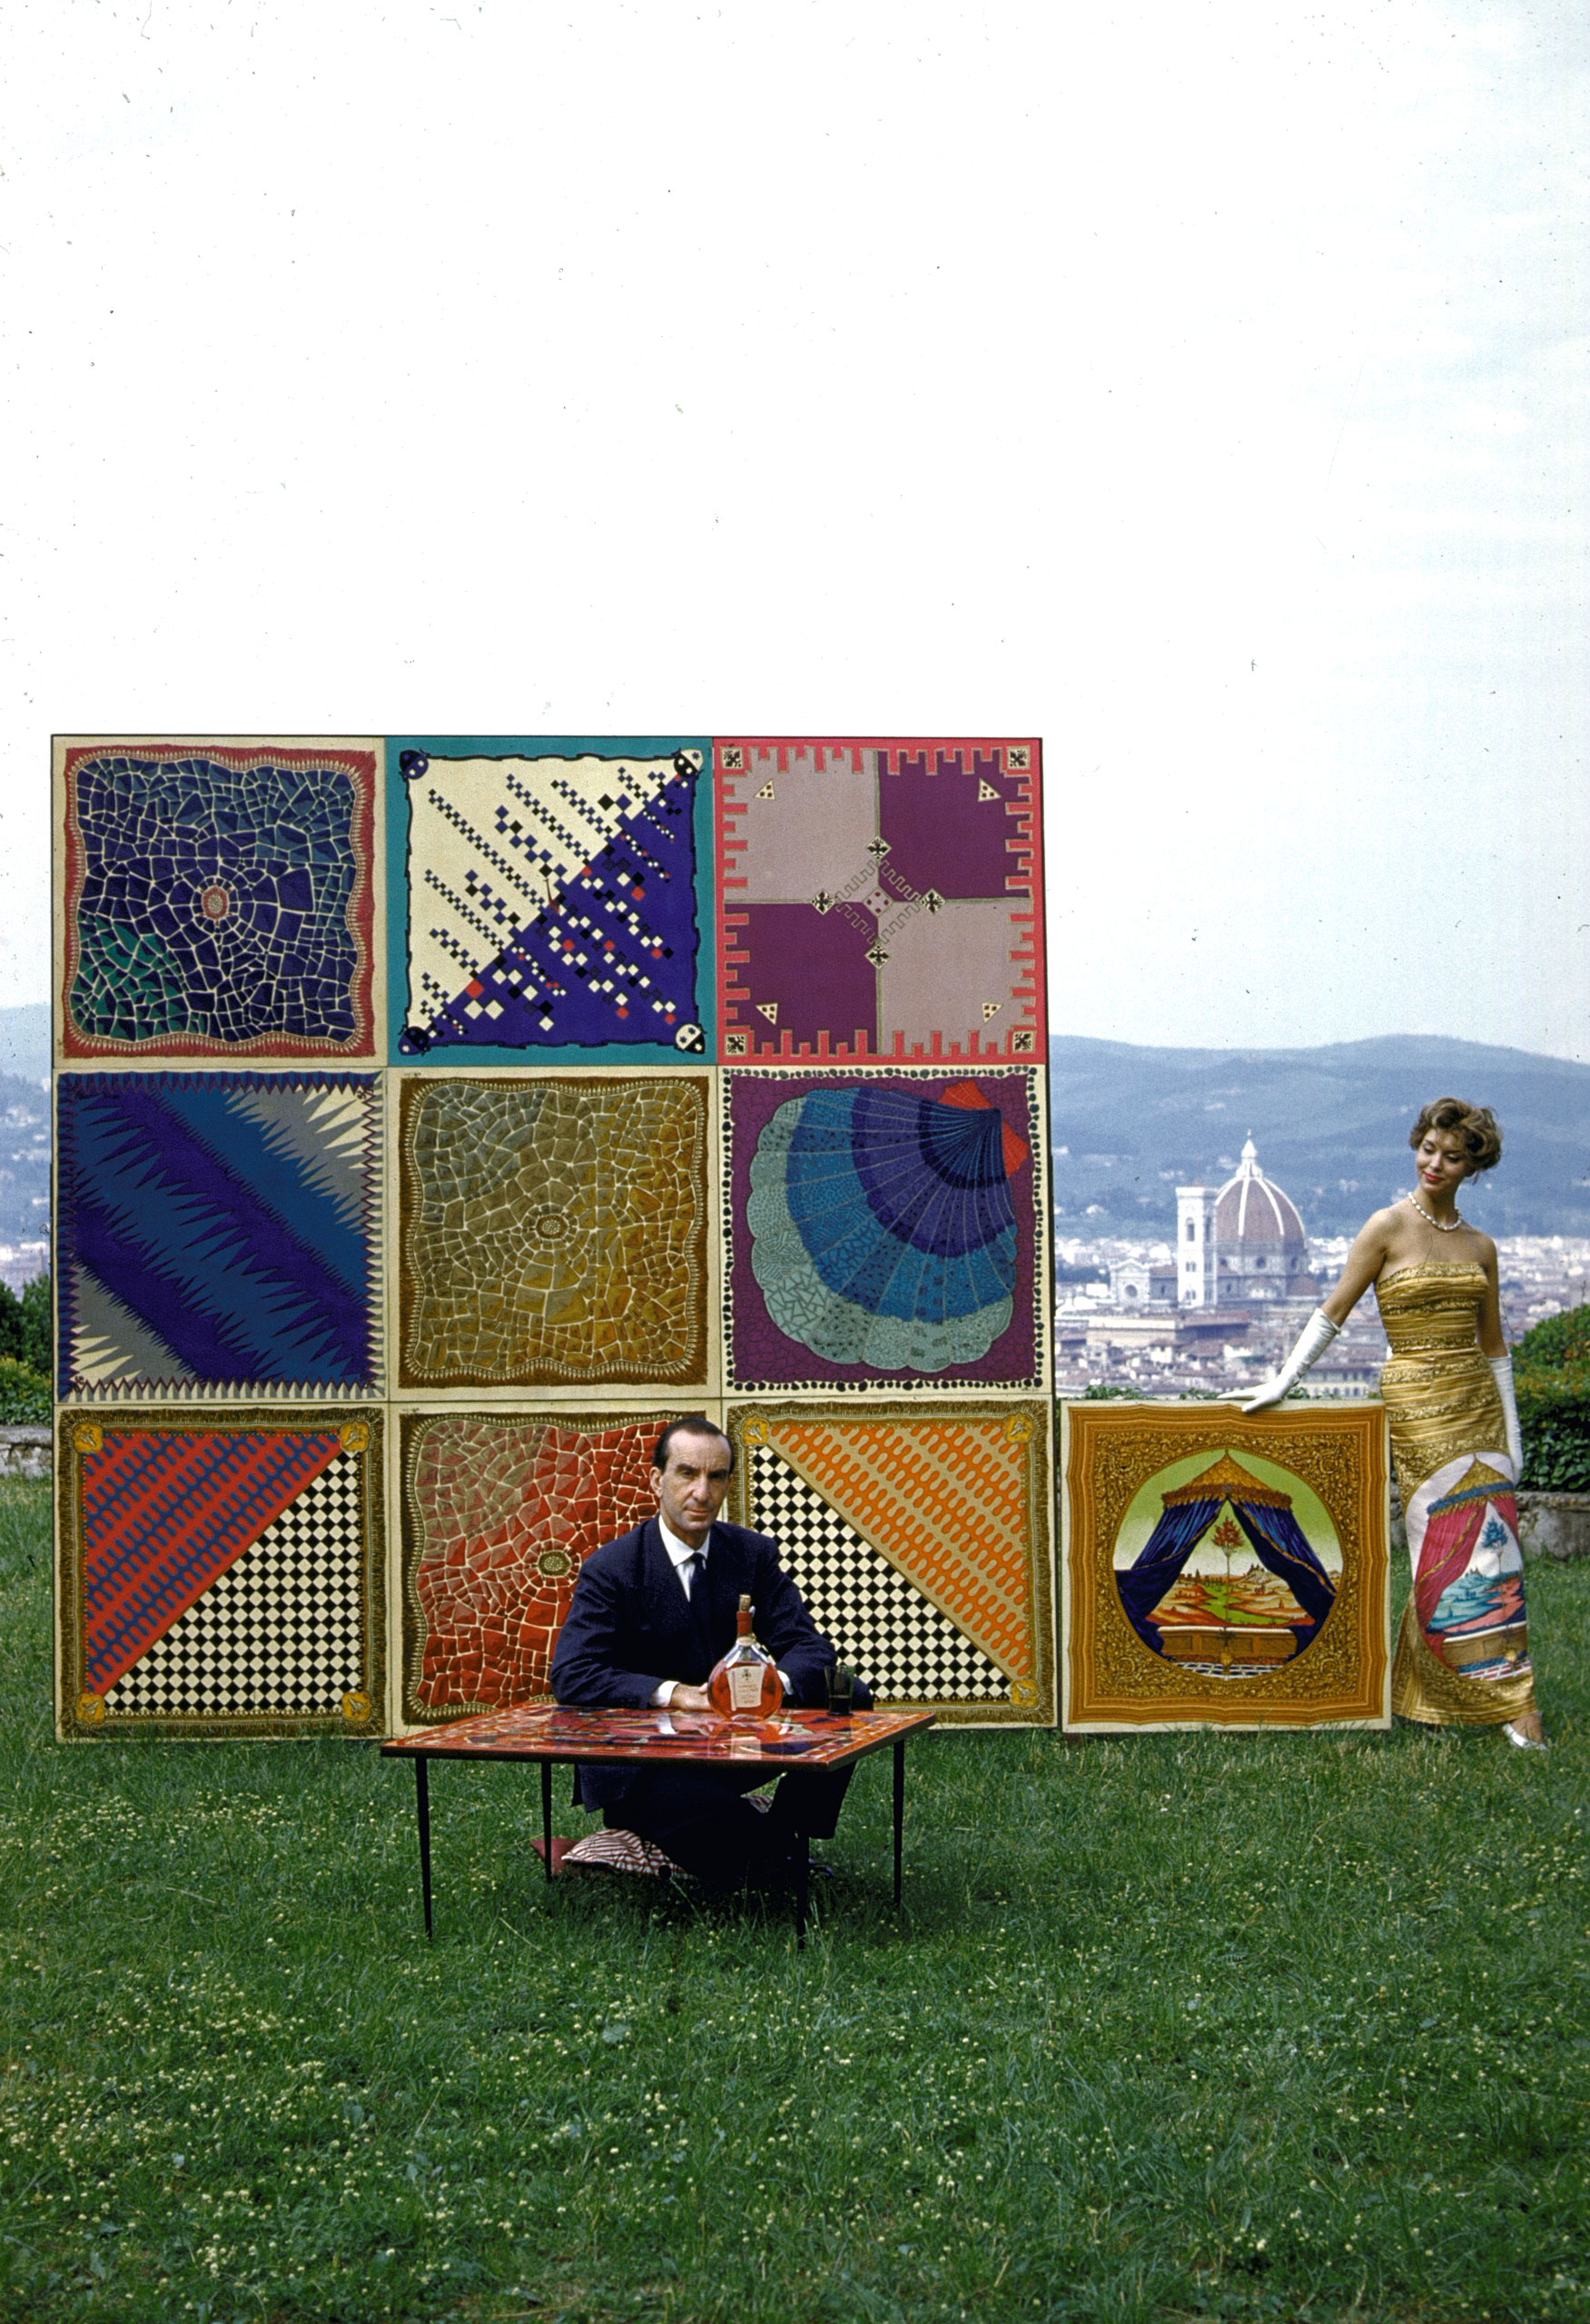 Designer Emilio Pucci on the lawn of his palazzo overlooking Florence, 1959.